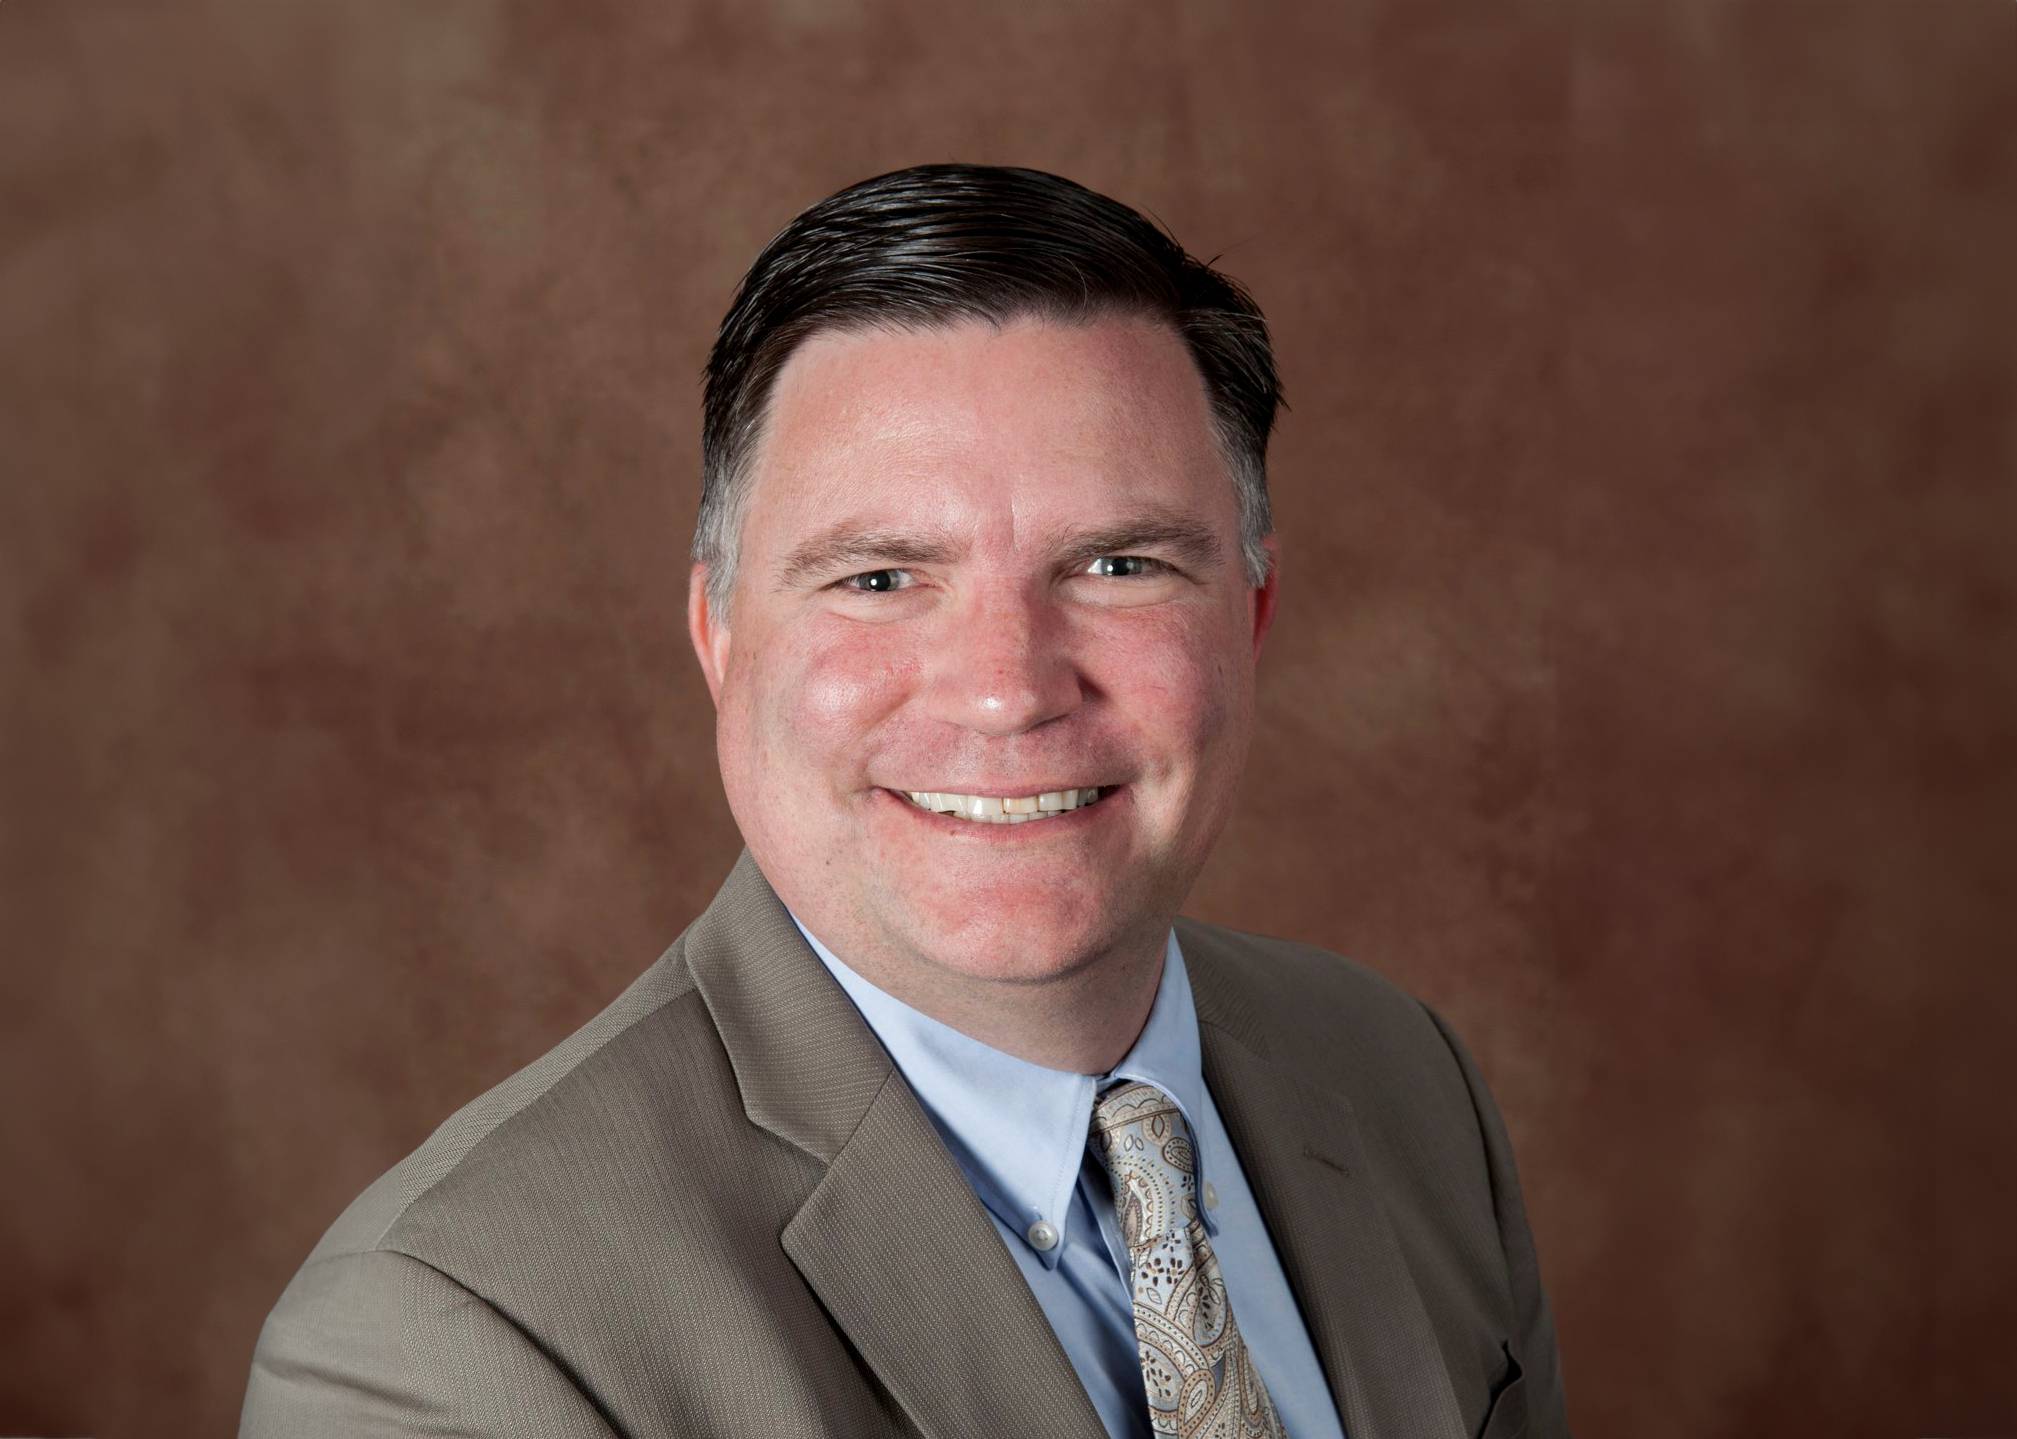 Texas State welcomes Michael Preston as new associate vice president
for Student Success